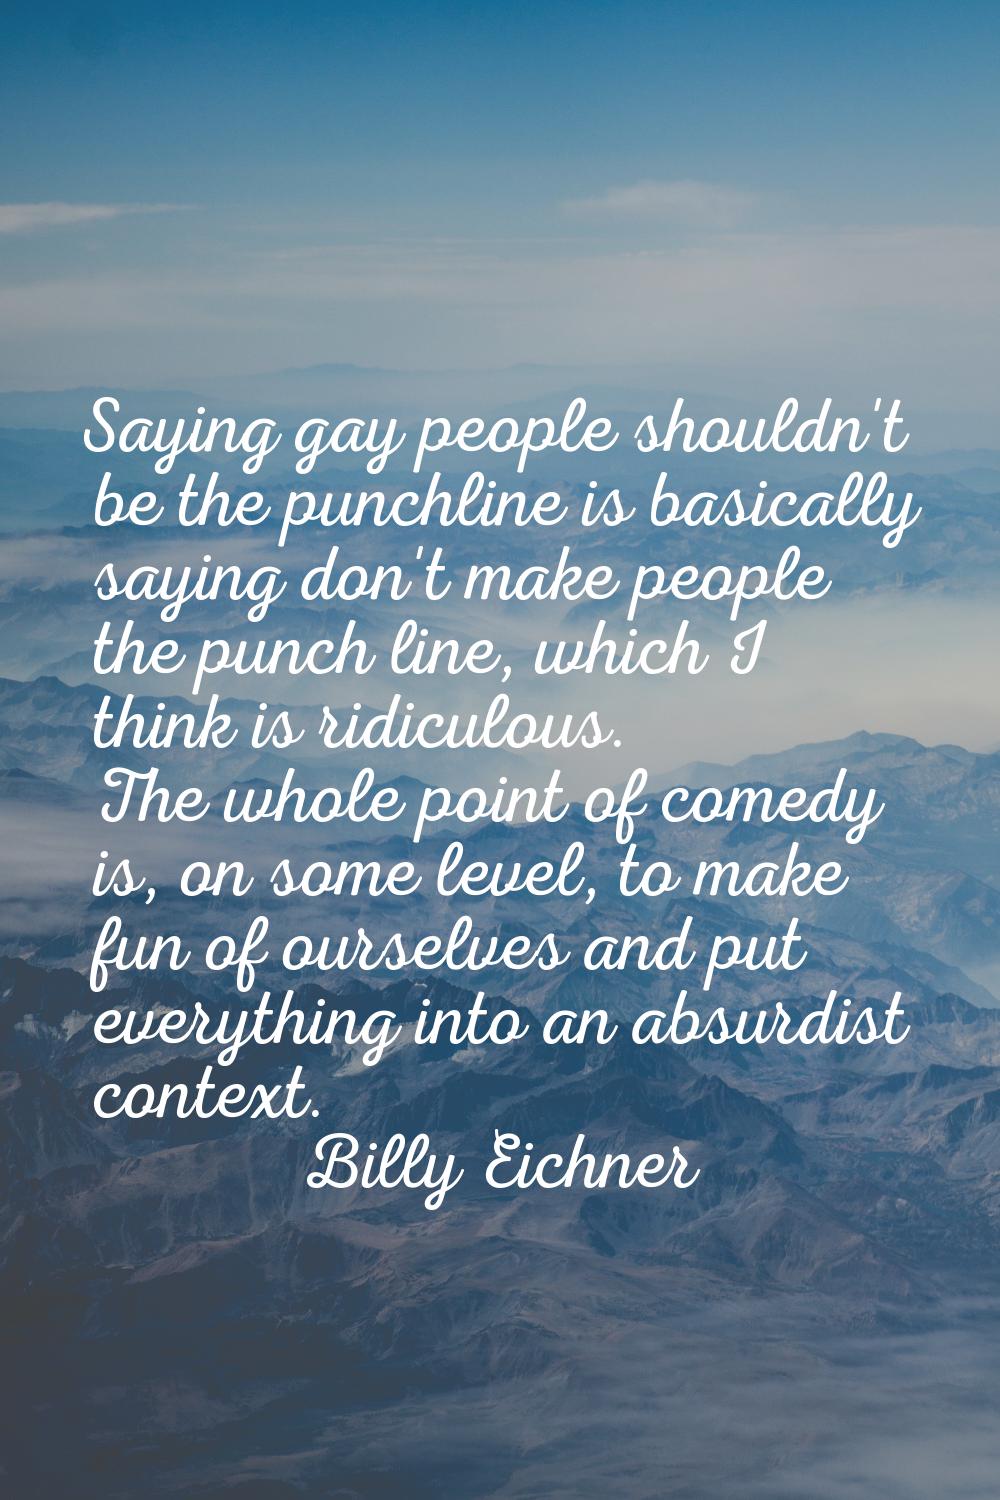 Saying gay people shouldn't be the punchline is basically saying don't make people the punch line, 